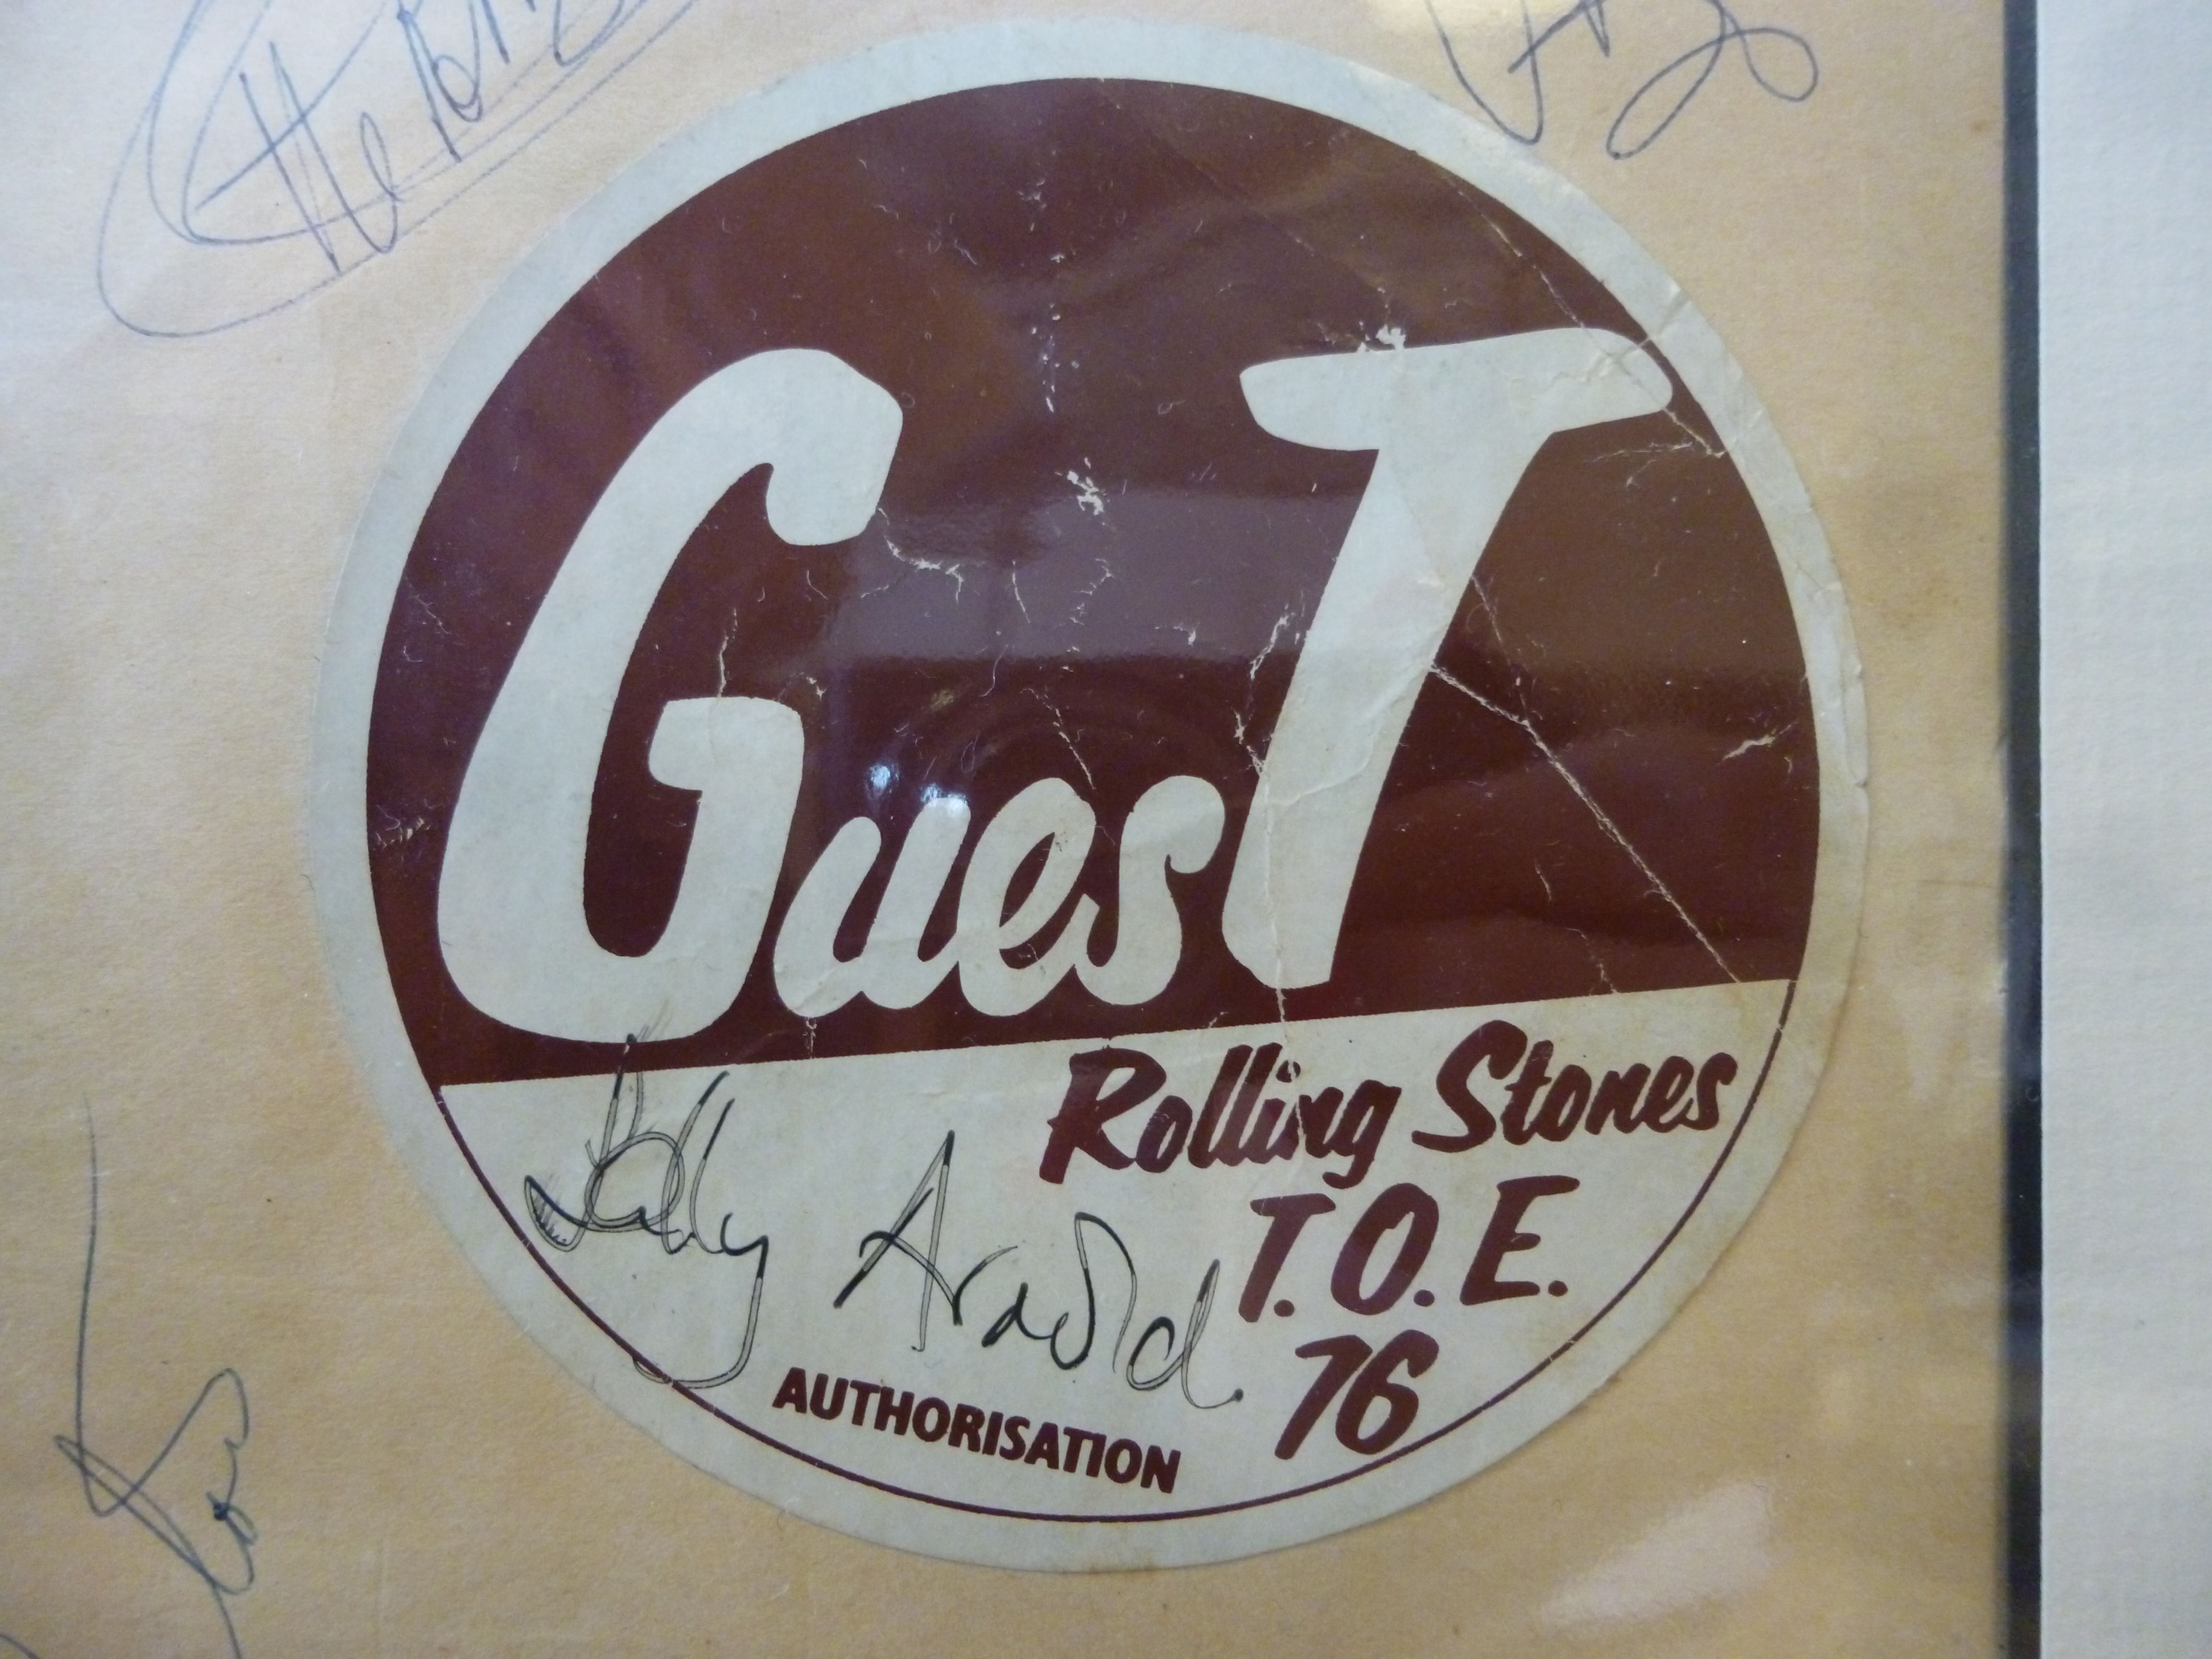 A backstage pass for the Rolling Stones - Image 3 of 4